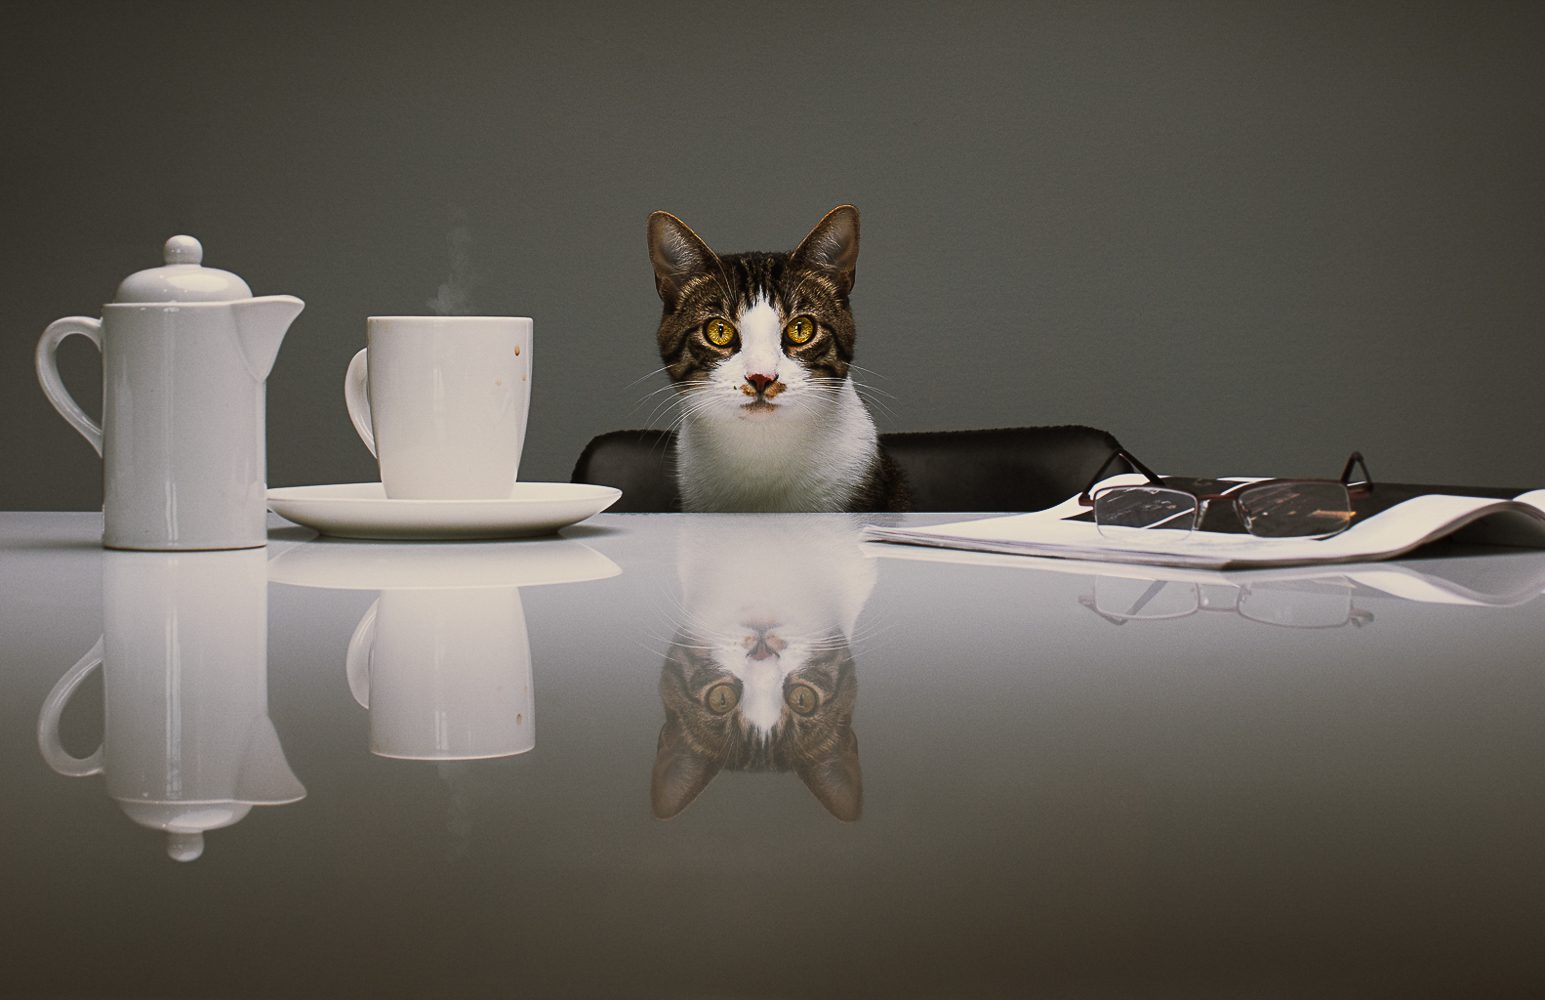 Cat at table with morning coffee